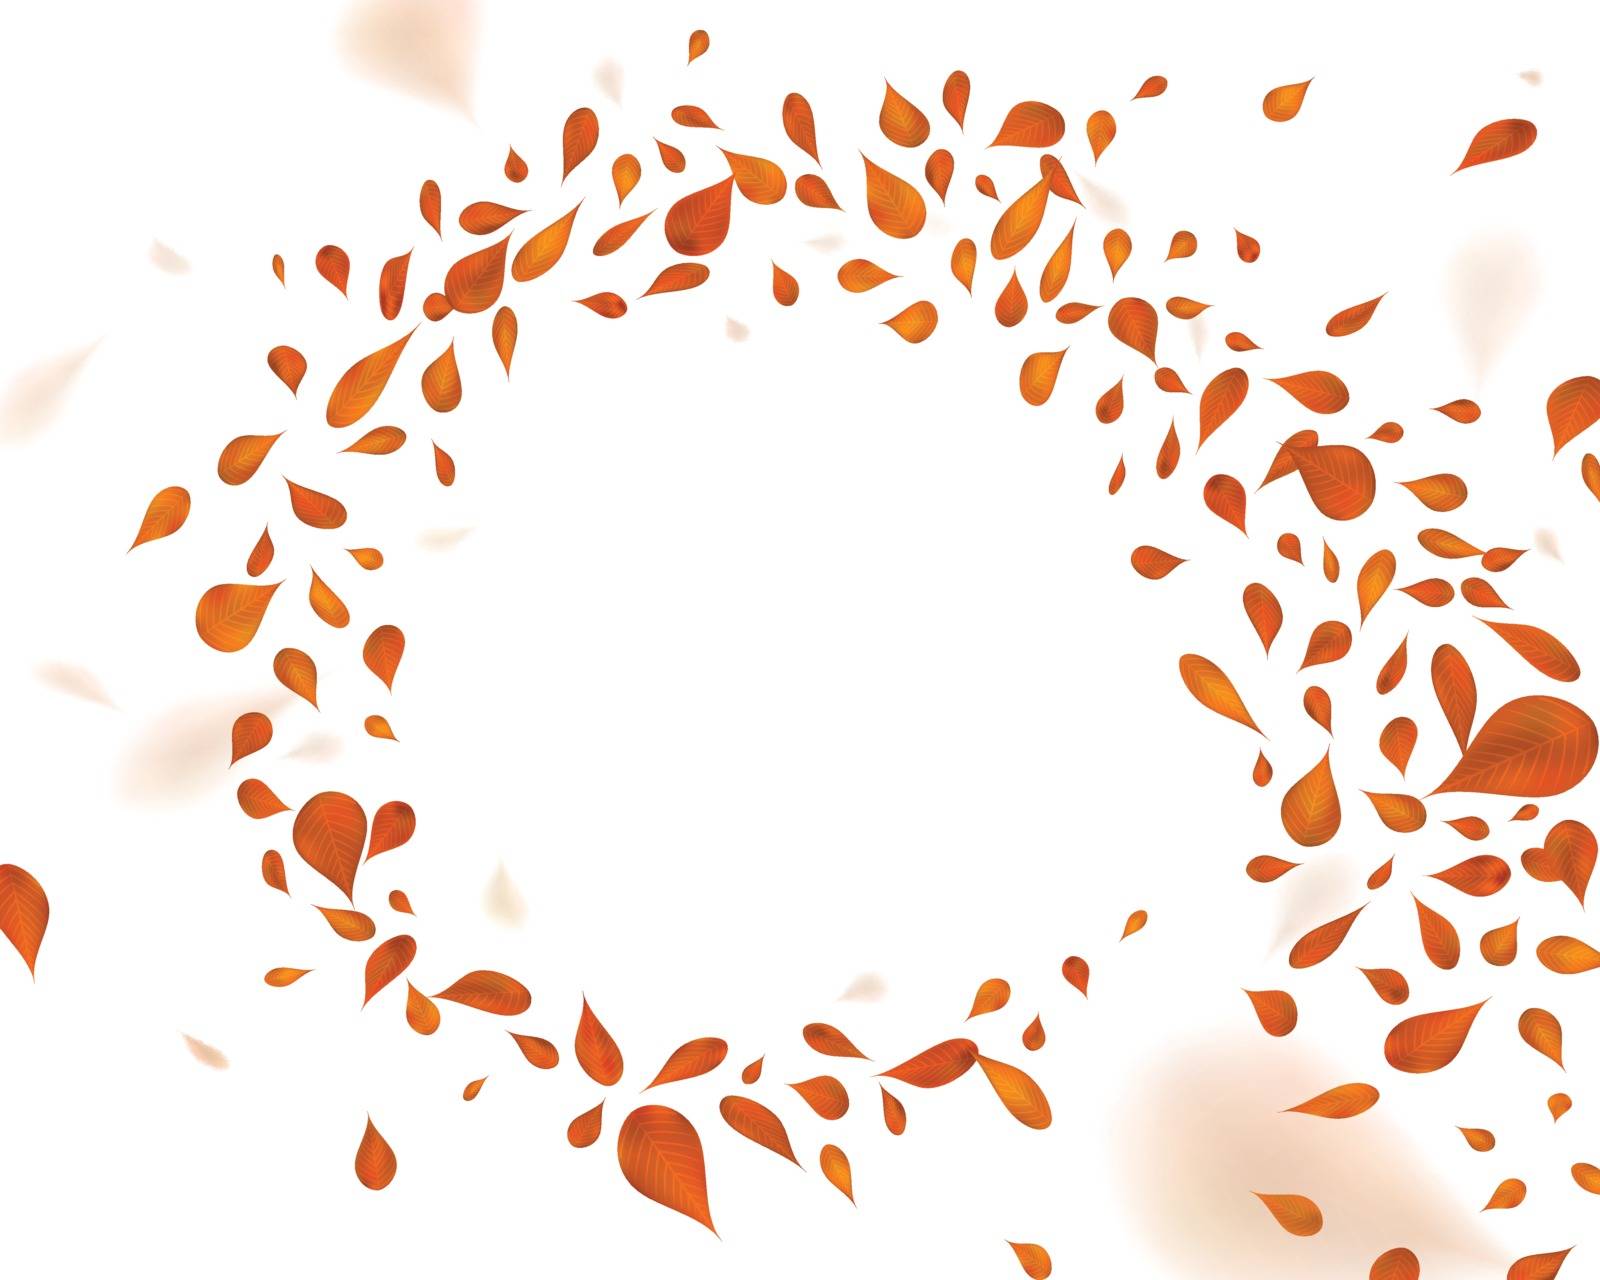 Swirling brown leafs in the wind, on white isolated background. Soft elegant decoration element with blurred effect, 3D illustration.